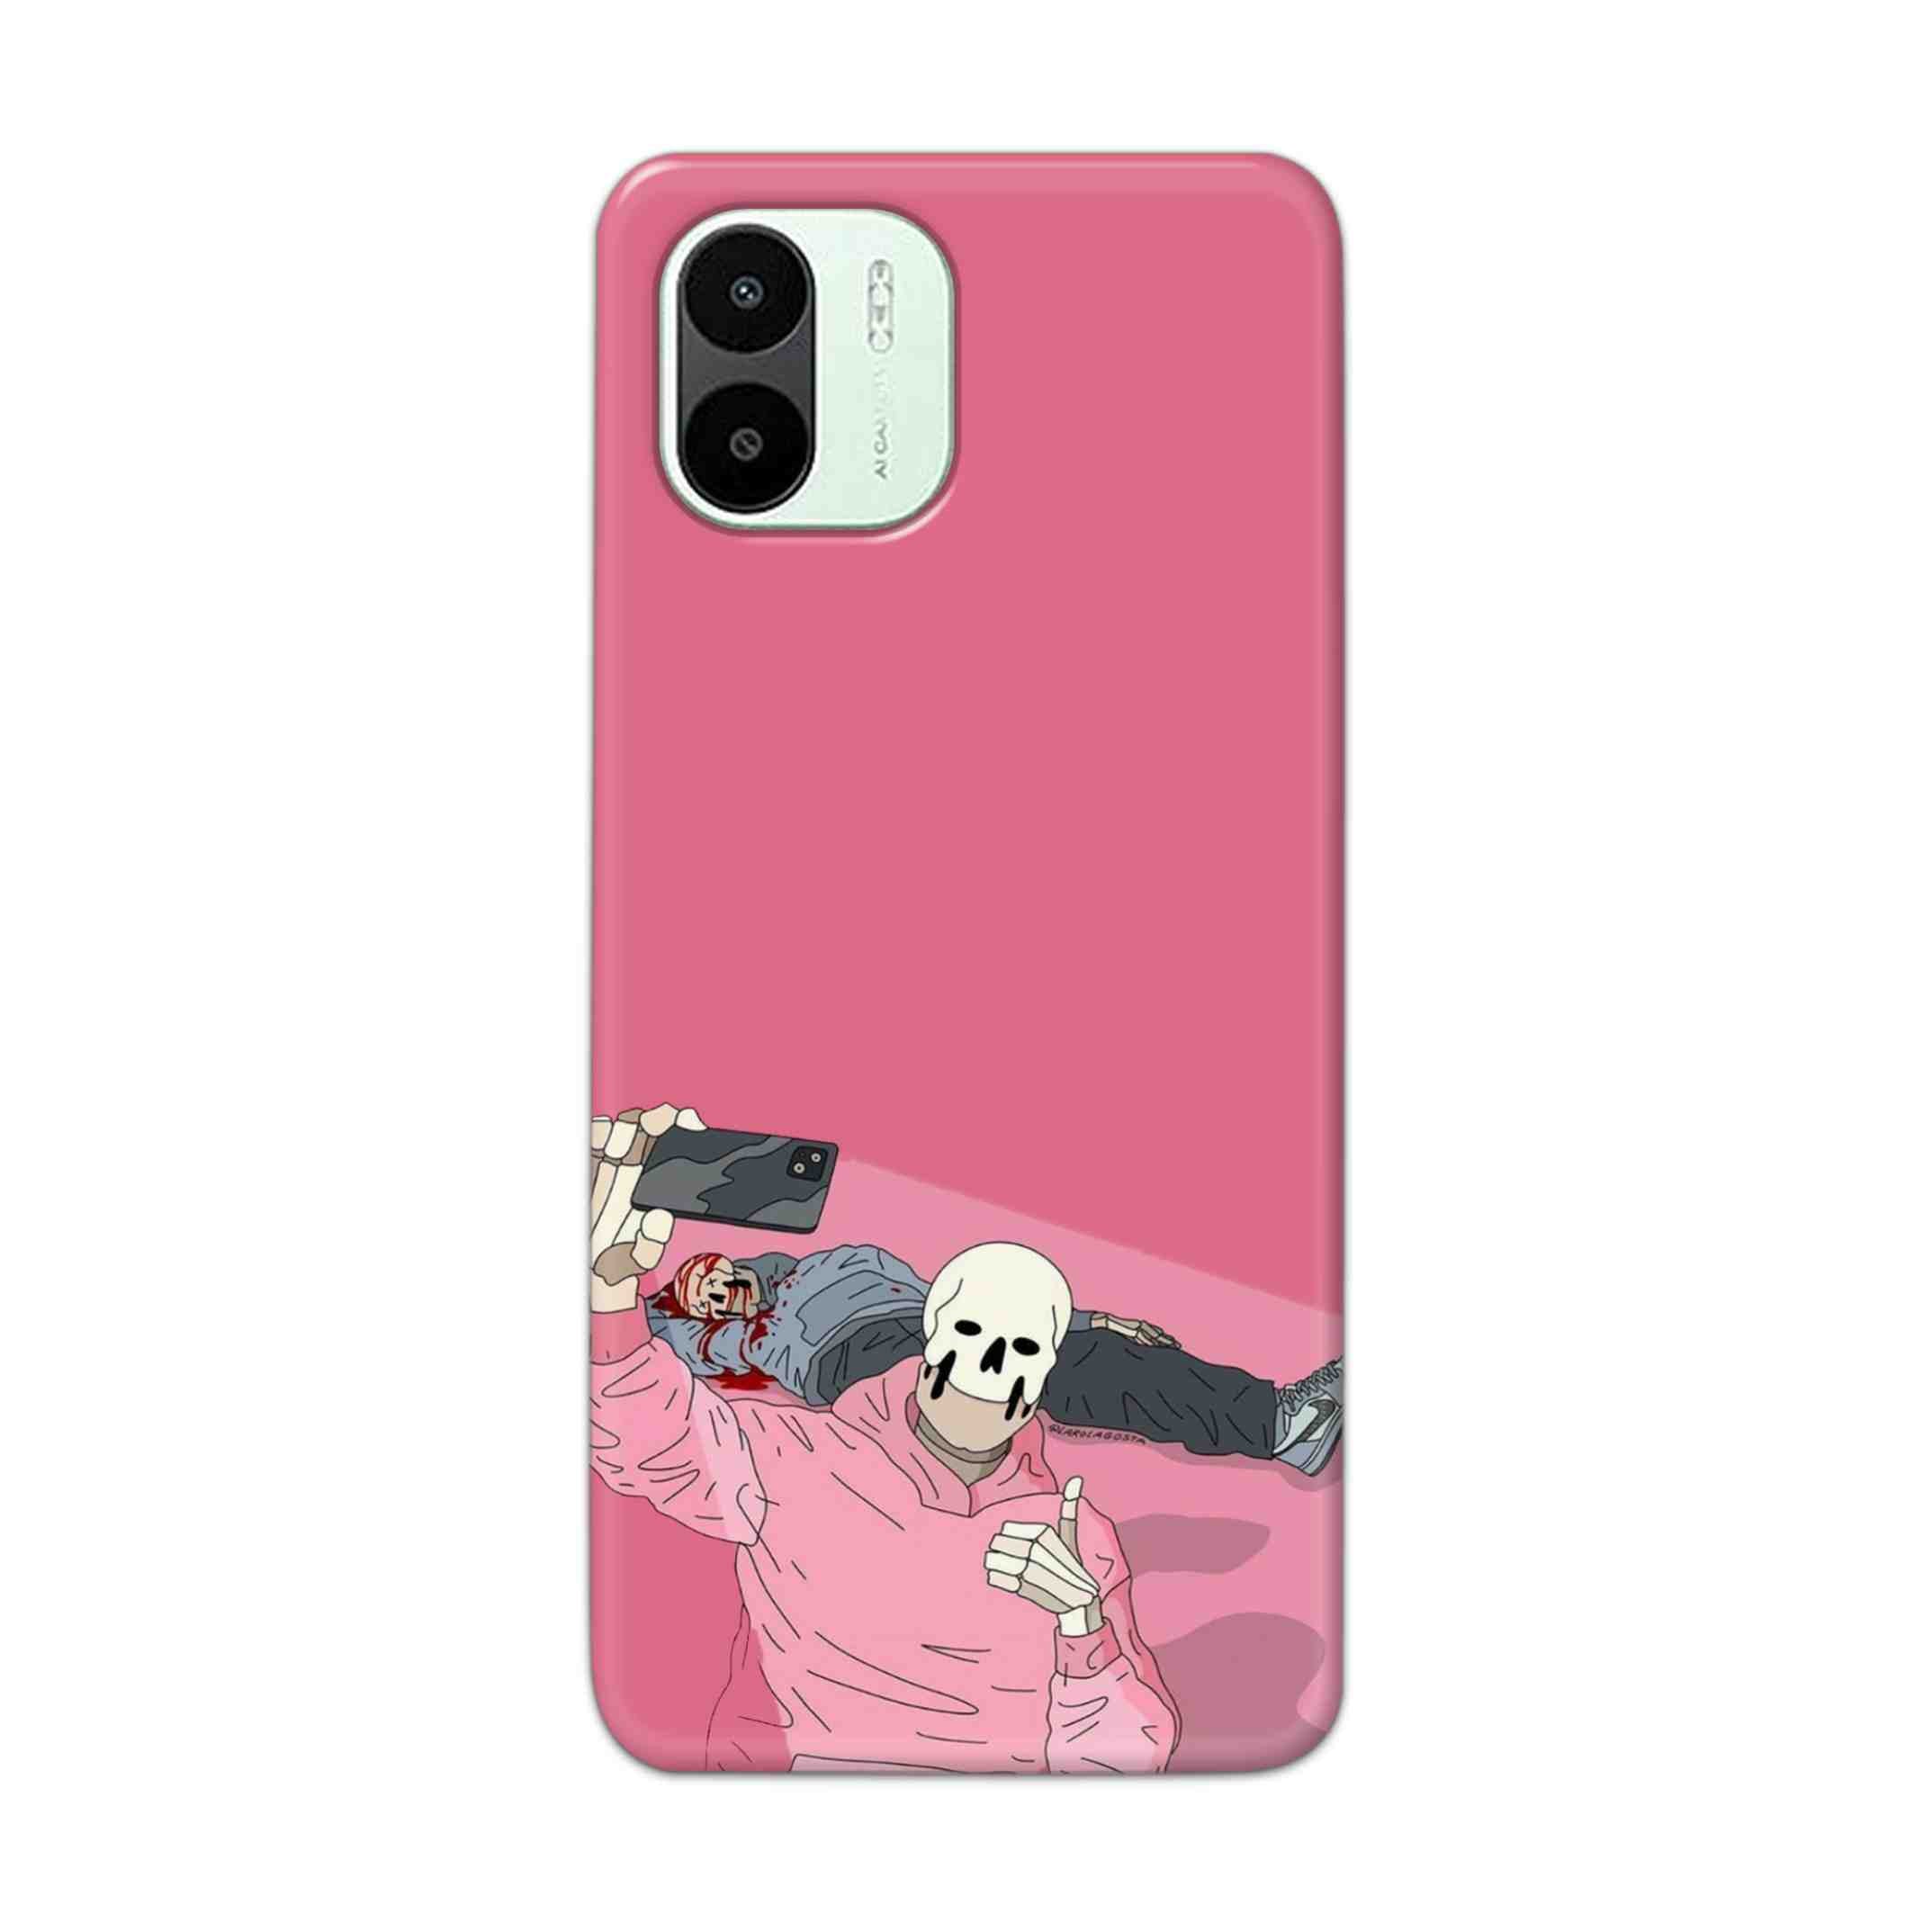 Buy Selfie Hard Back Mobile Phone Case Cover For Xiaomi Redmi A1 5G Online